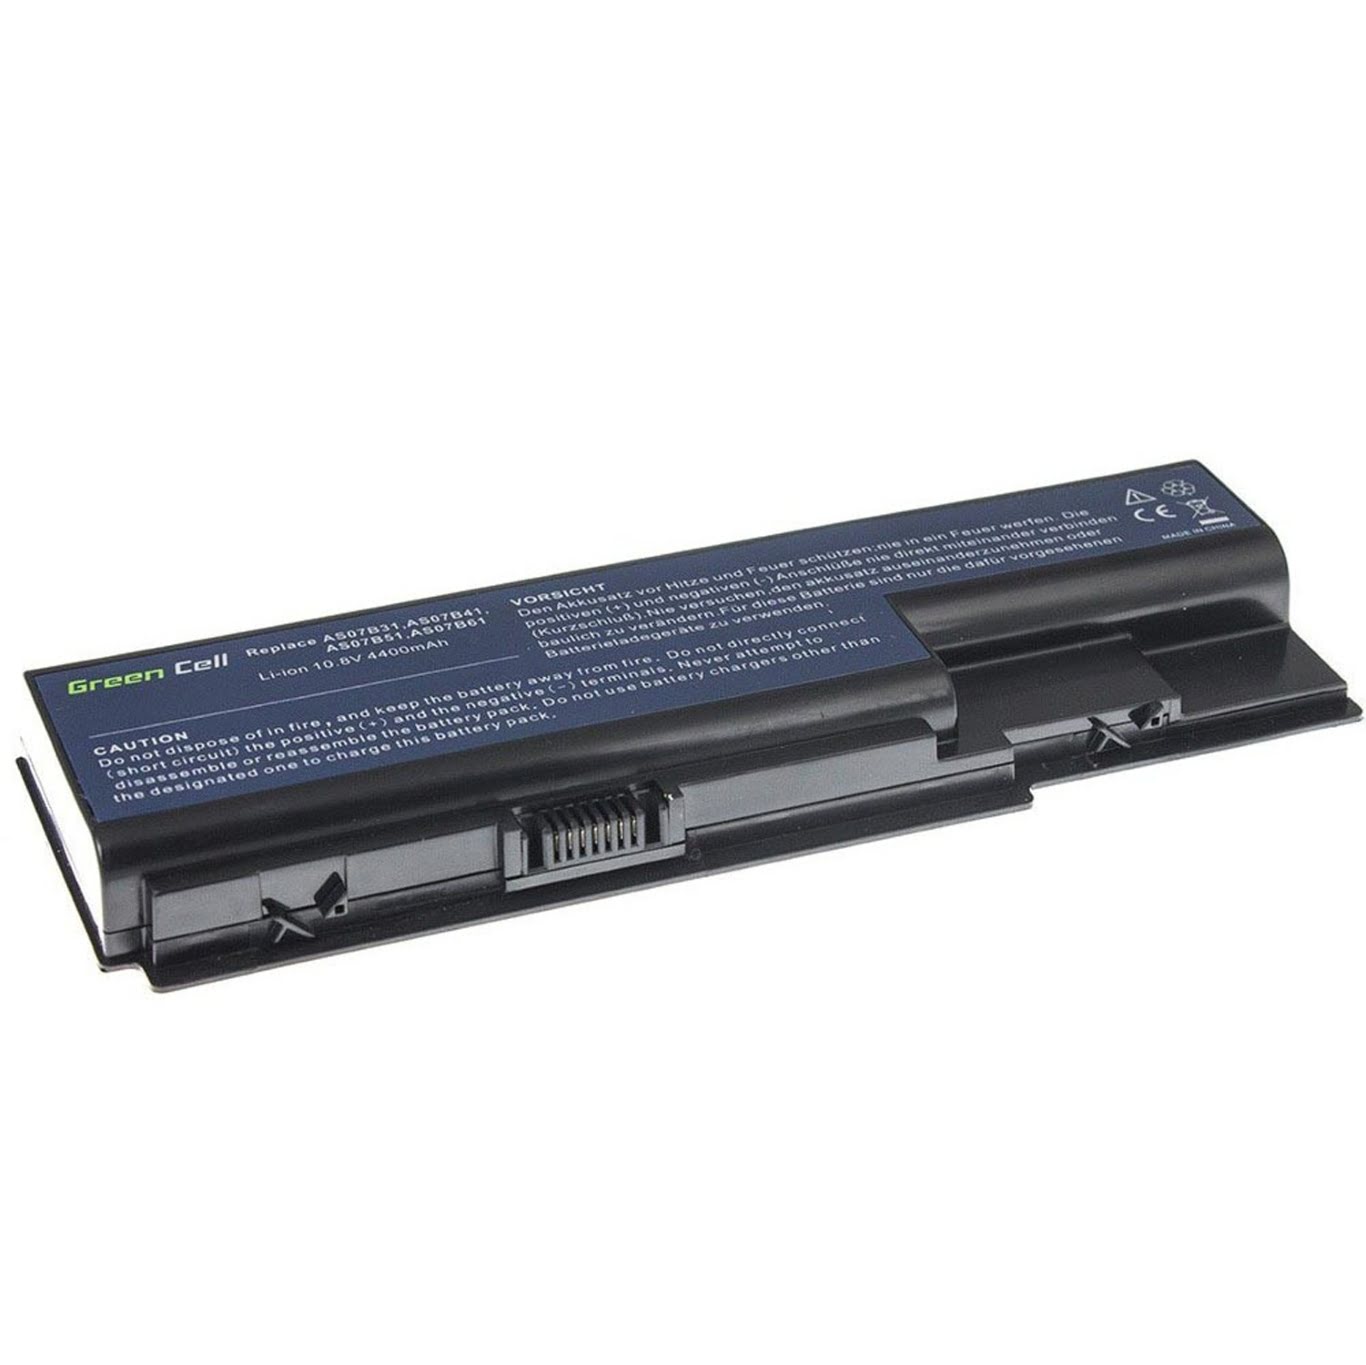 AS07B31, AS07B32 replacement Laptop Battery for Acer Business Notebook 2230s, 4400mAh, 6 cells, 10.8V